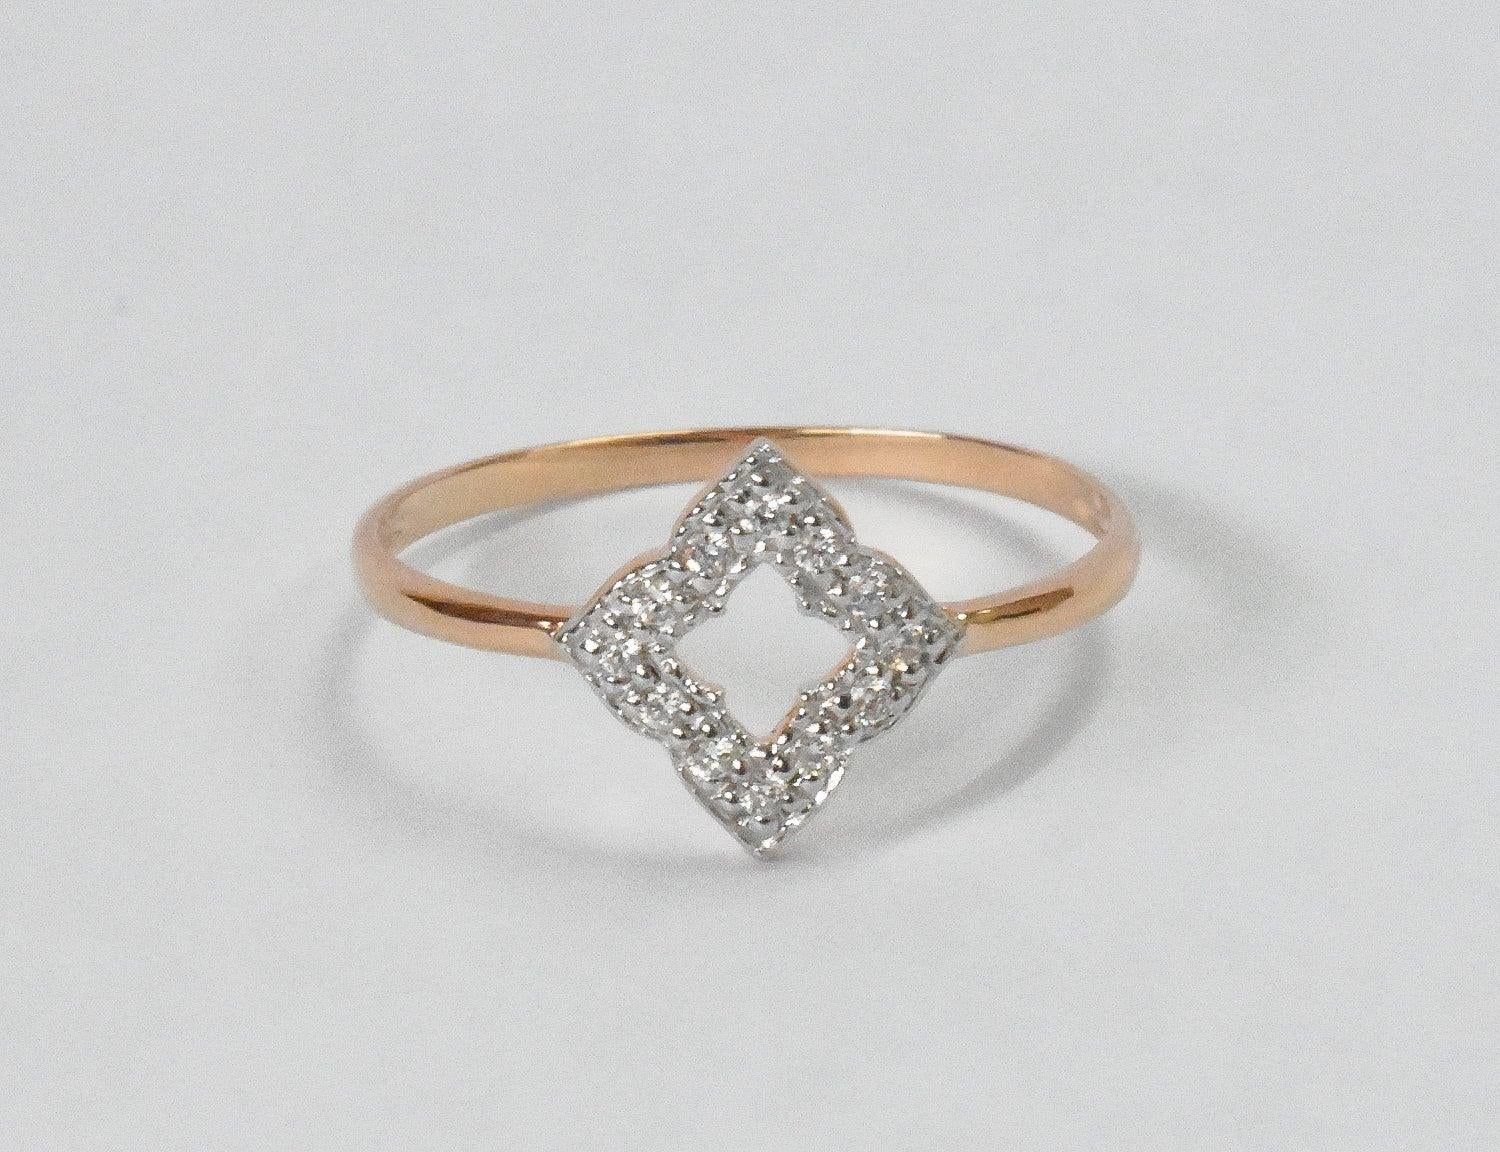 For Sale:  18k Gold Diamond Clover Ring Engagement Ring Stackable Diamond Ring 2